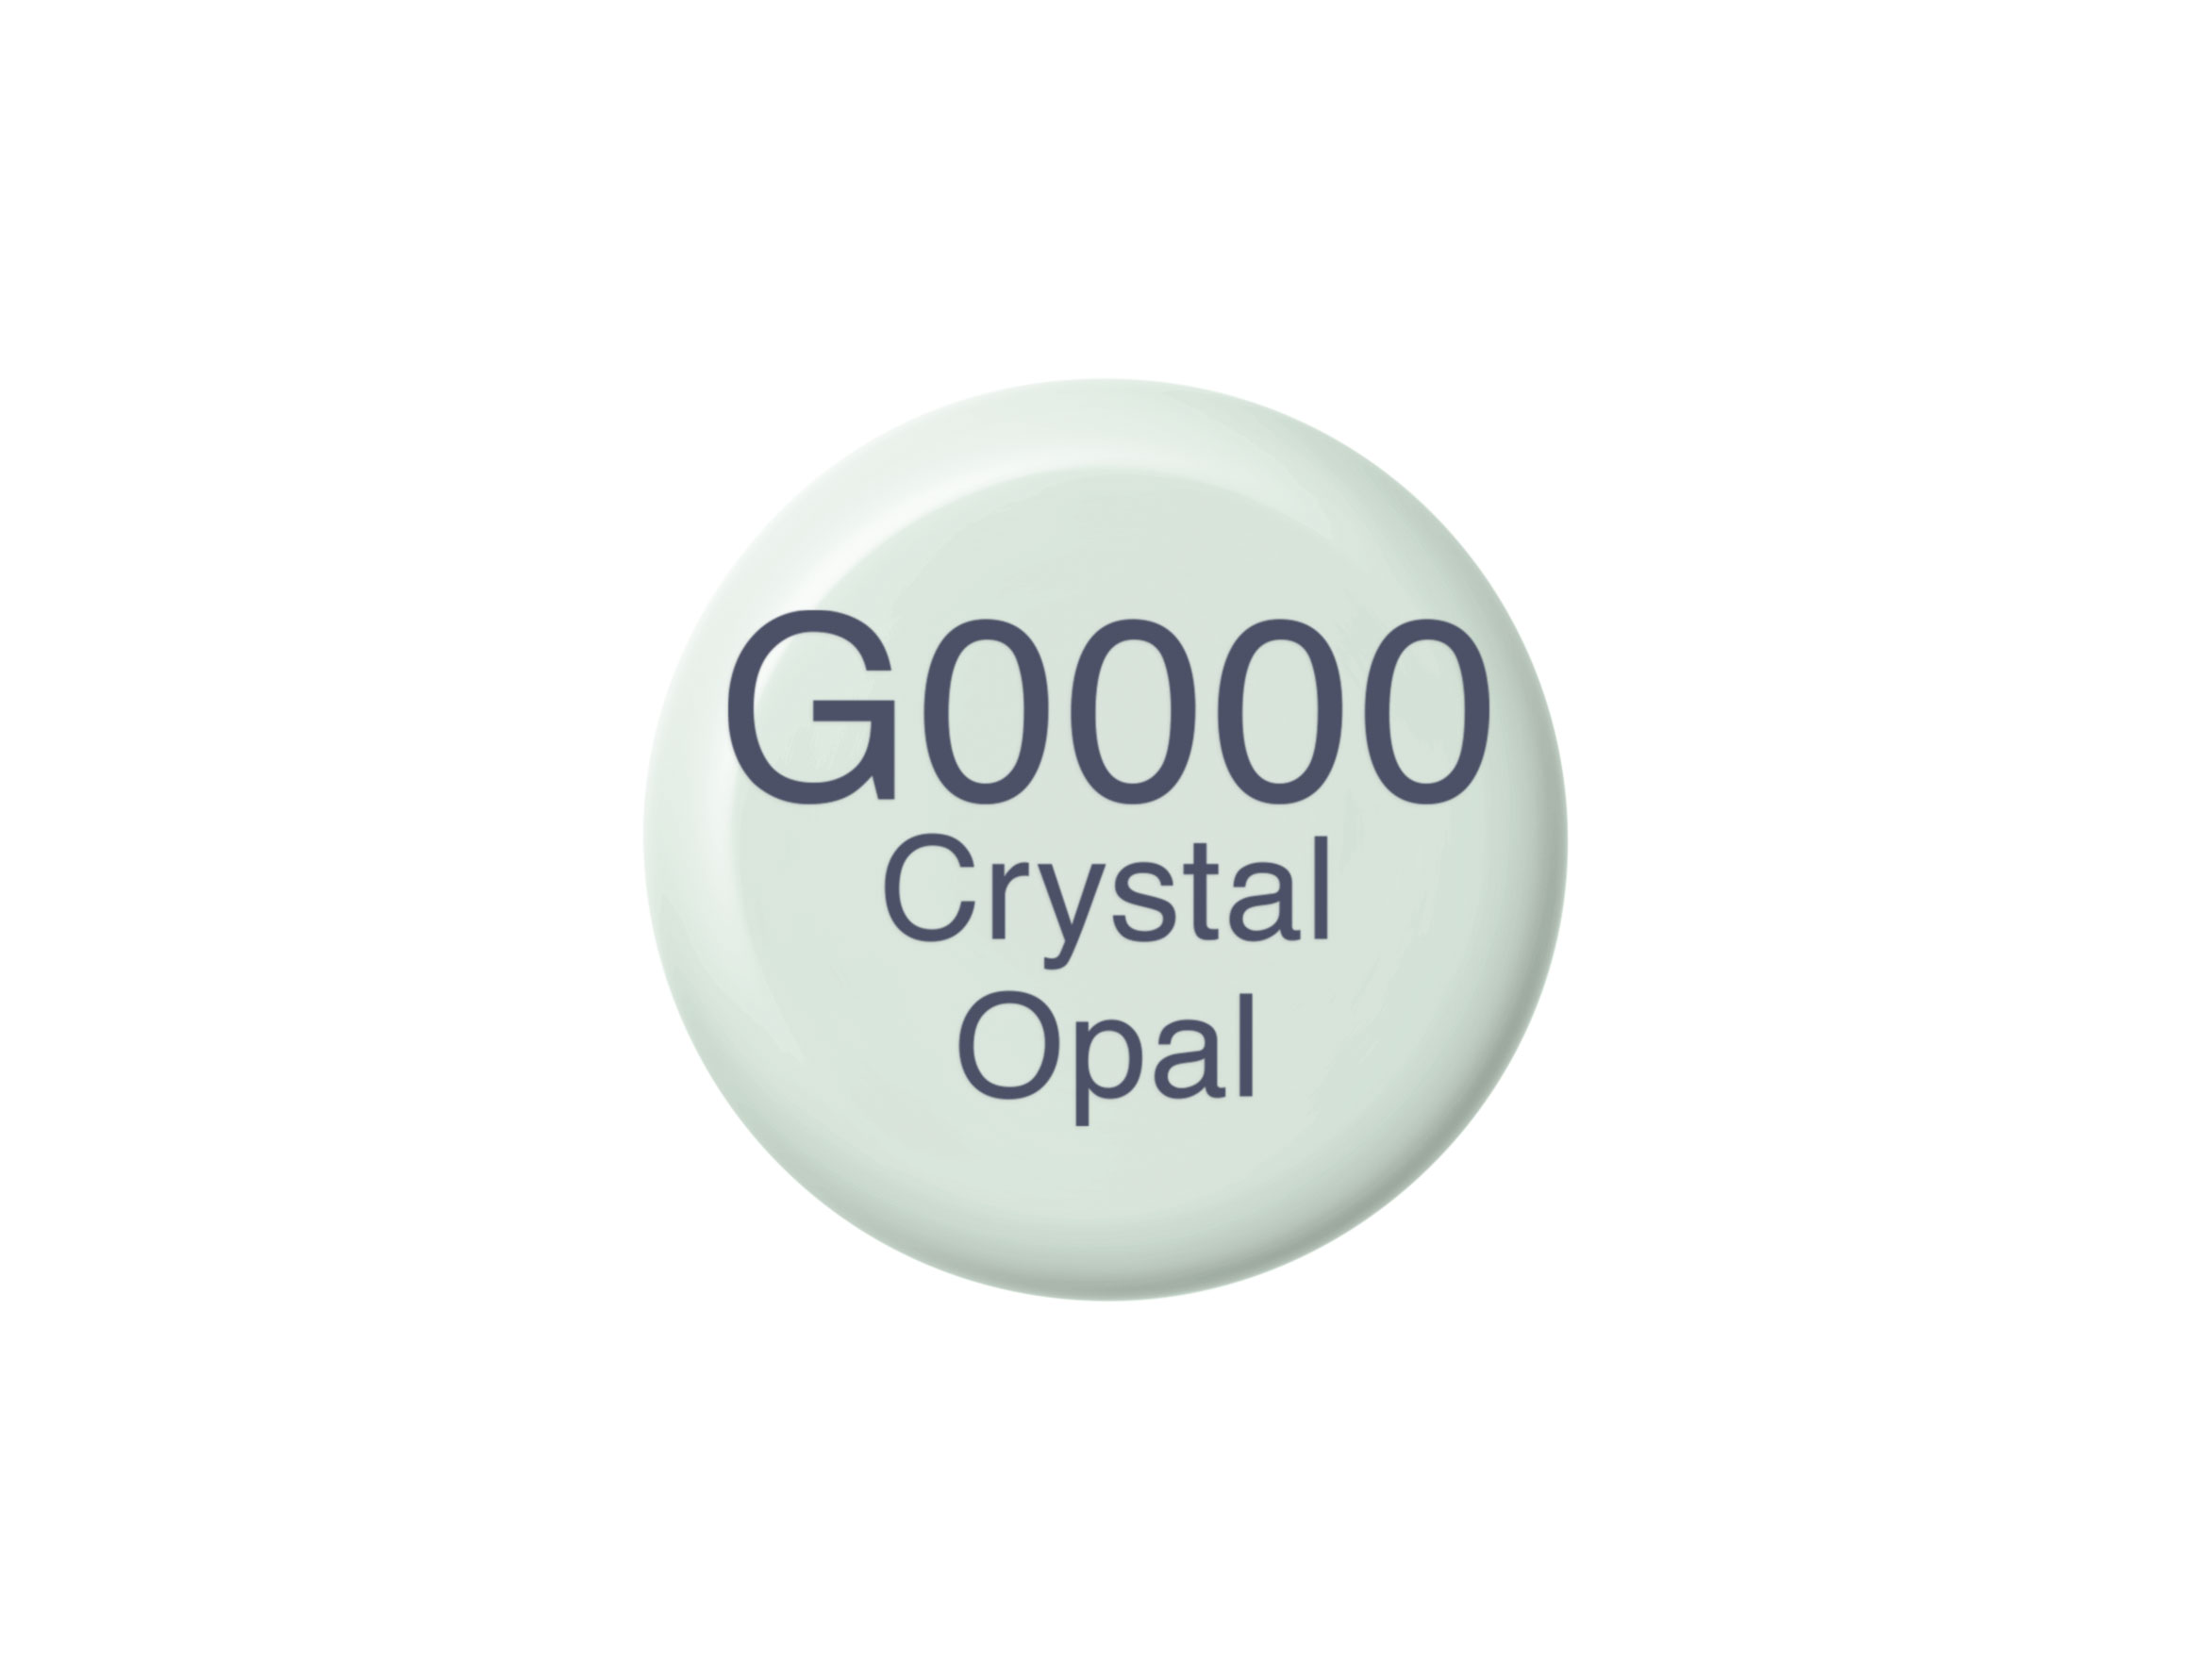 Copic Ink G0000 Crystal Opal